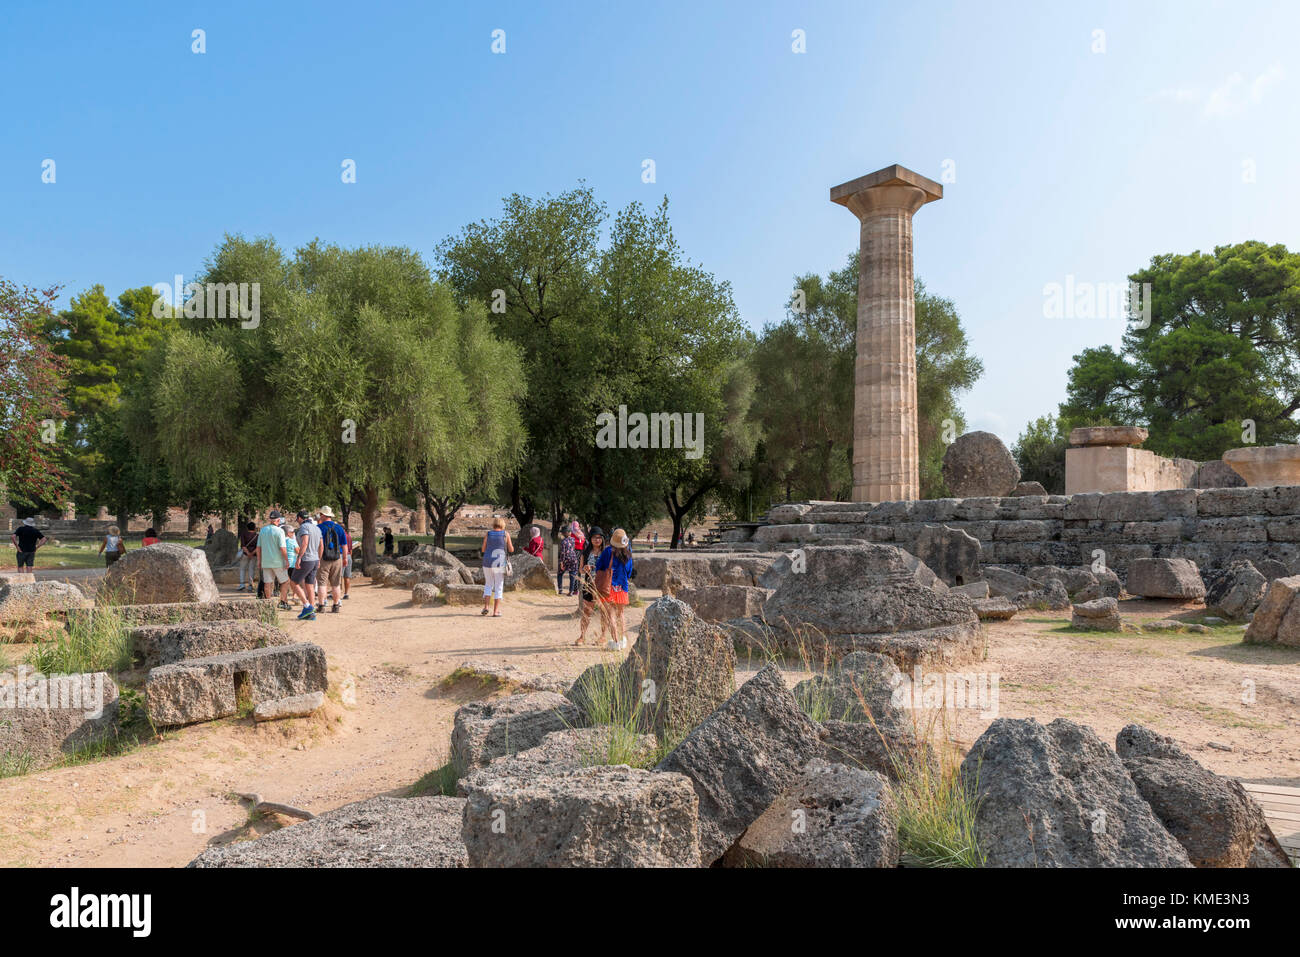 Group of tourists at the Temple of Zeus, Ancient Olympia, Pelopponese, Greece Stock Photo